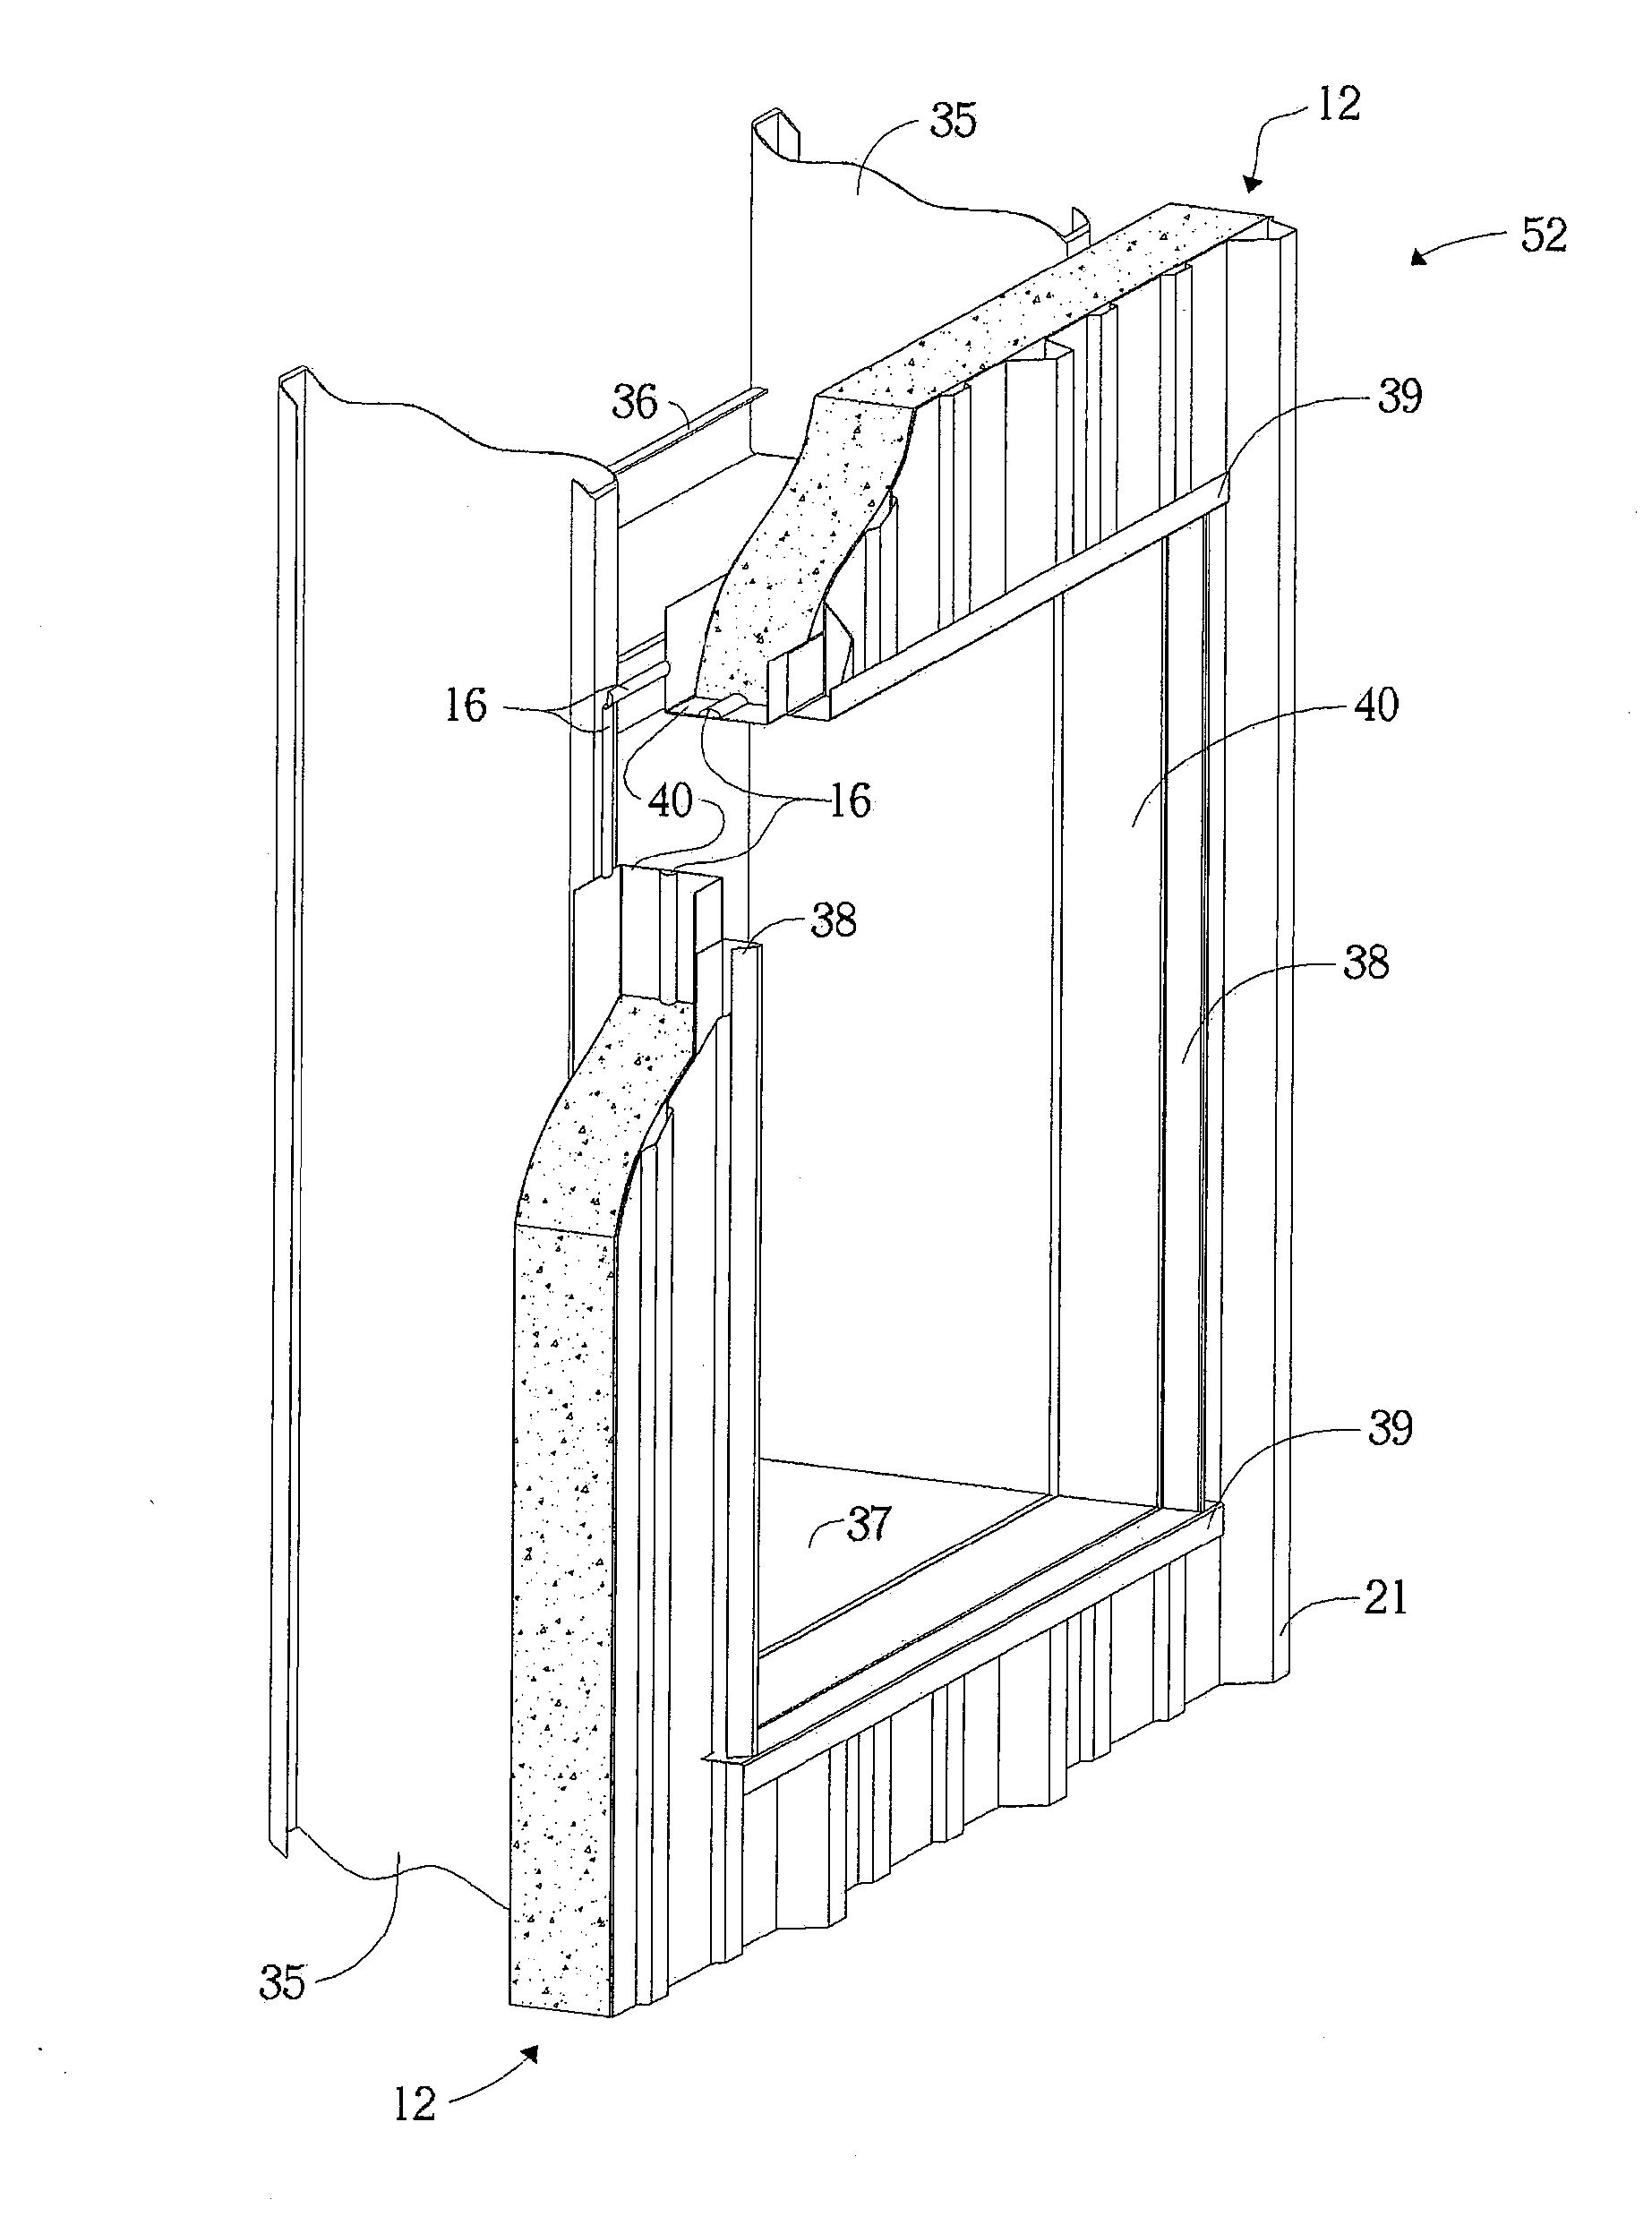 Composite insulating building panel and system and method for attaching building panels